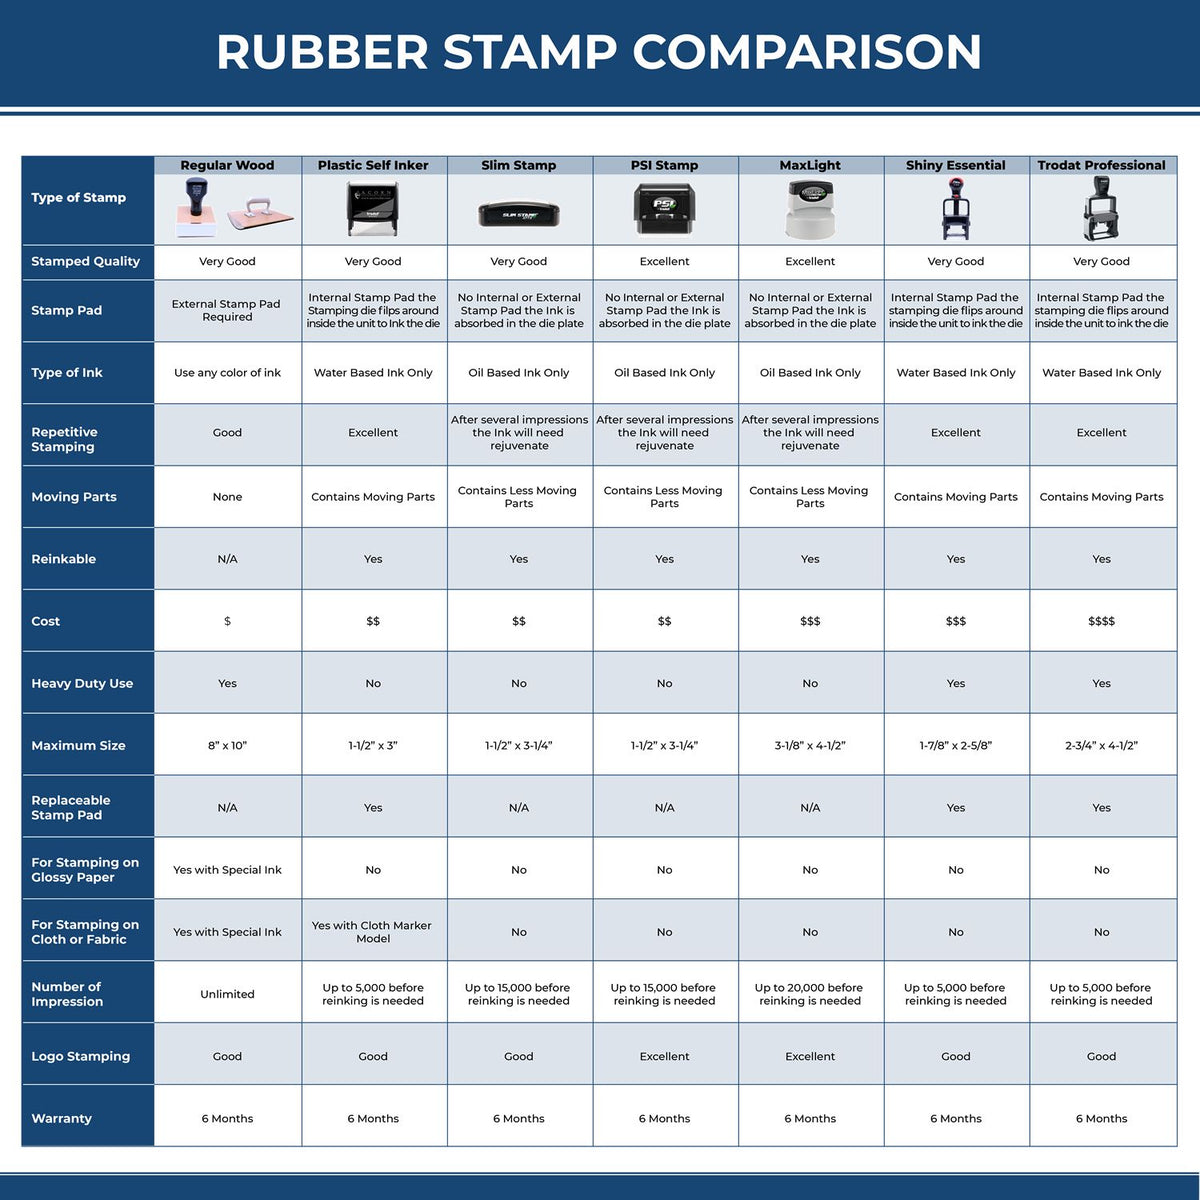 Large Times Faxed with Line Rubber Stamp 4870R Rubber Stamp Comparison